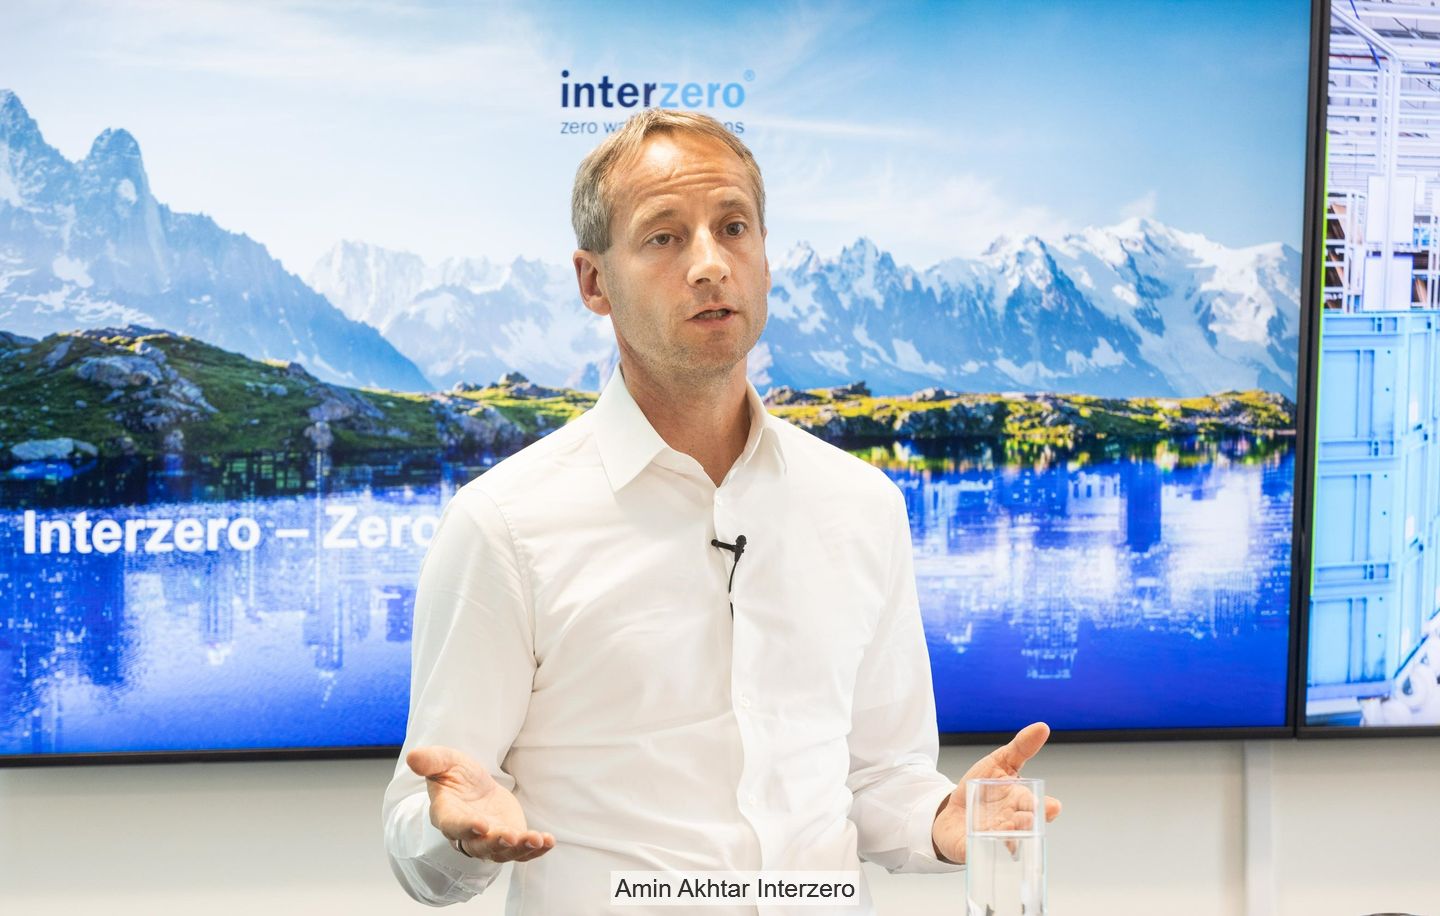 Axel Schweitzer stands in front of a screen emblazoned with the "Interzero" logo